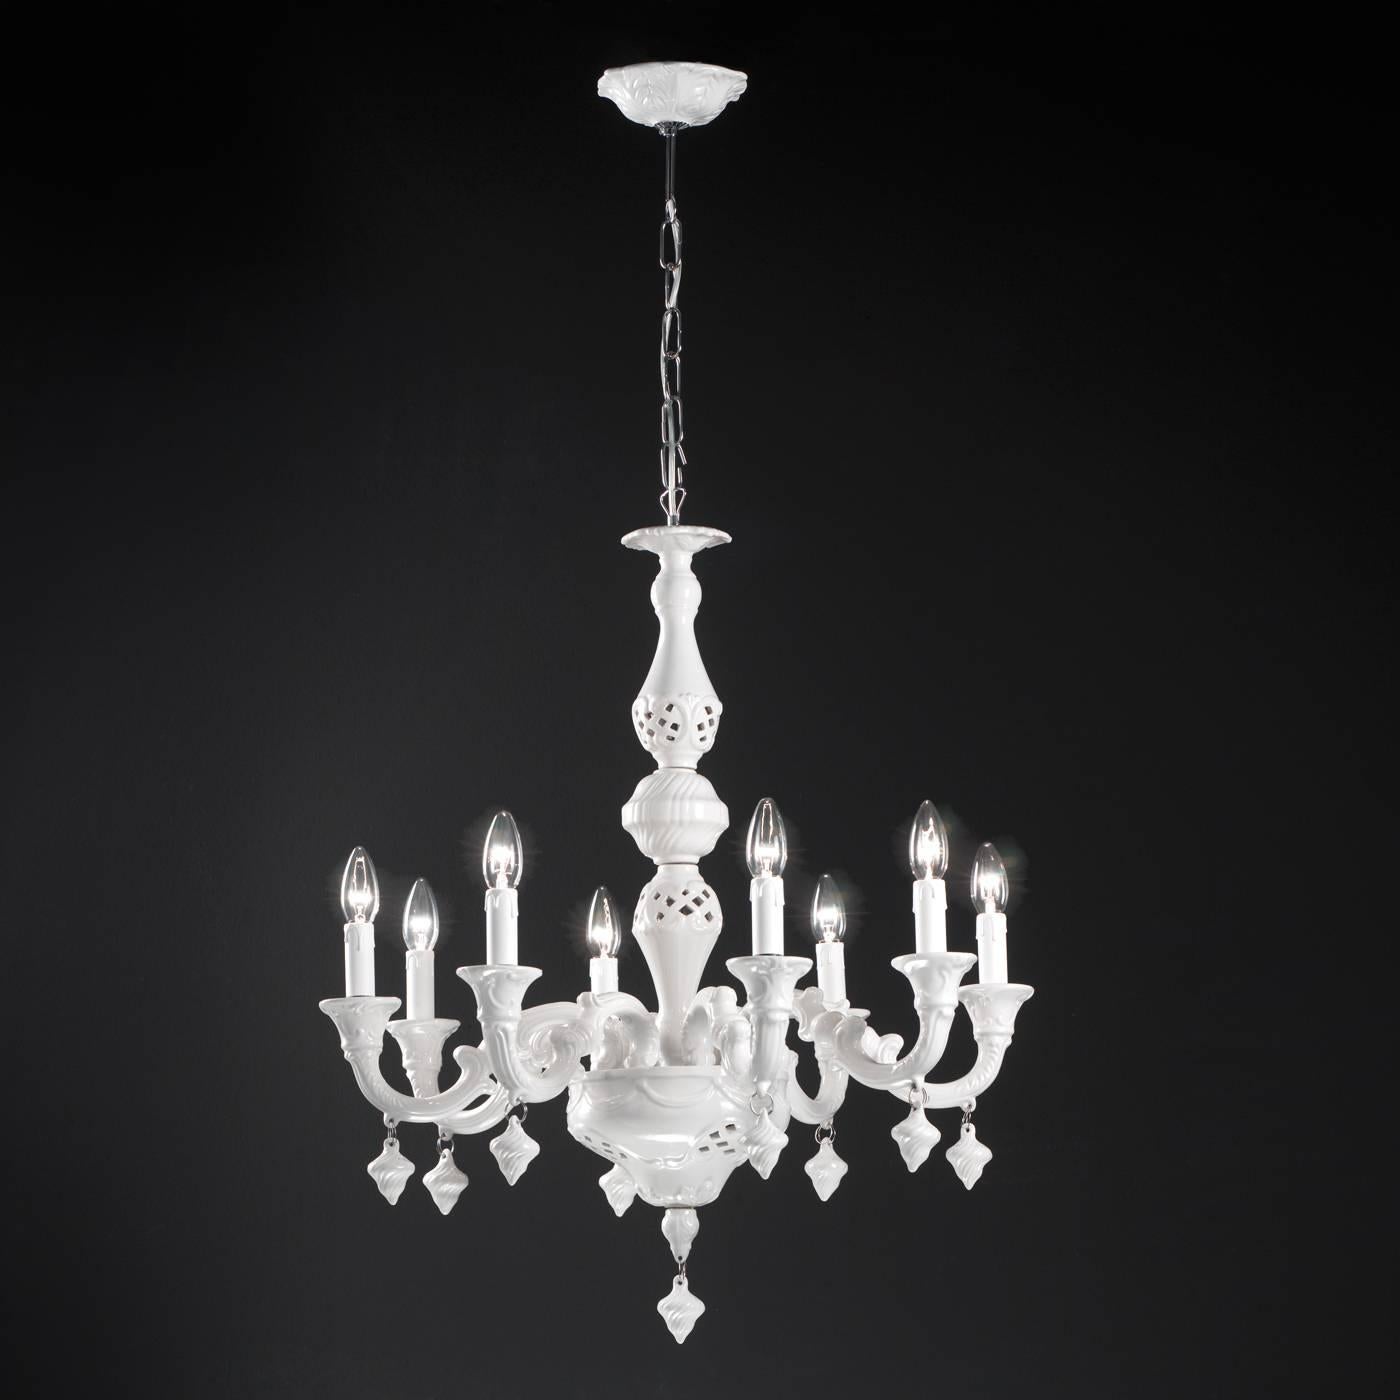 This elegant chandelier was crafted entirely by hand in ceramics and then covered in a premium opaque white glaze. This piece is of a smaller size perfect for the illumination of smaller spaces. Eight arms sinuously curve outward, each one holding a